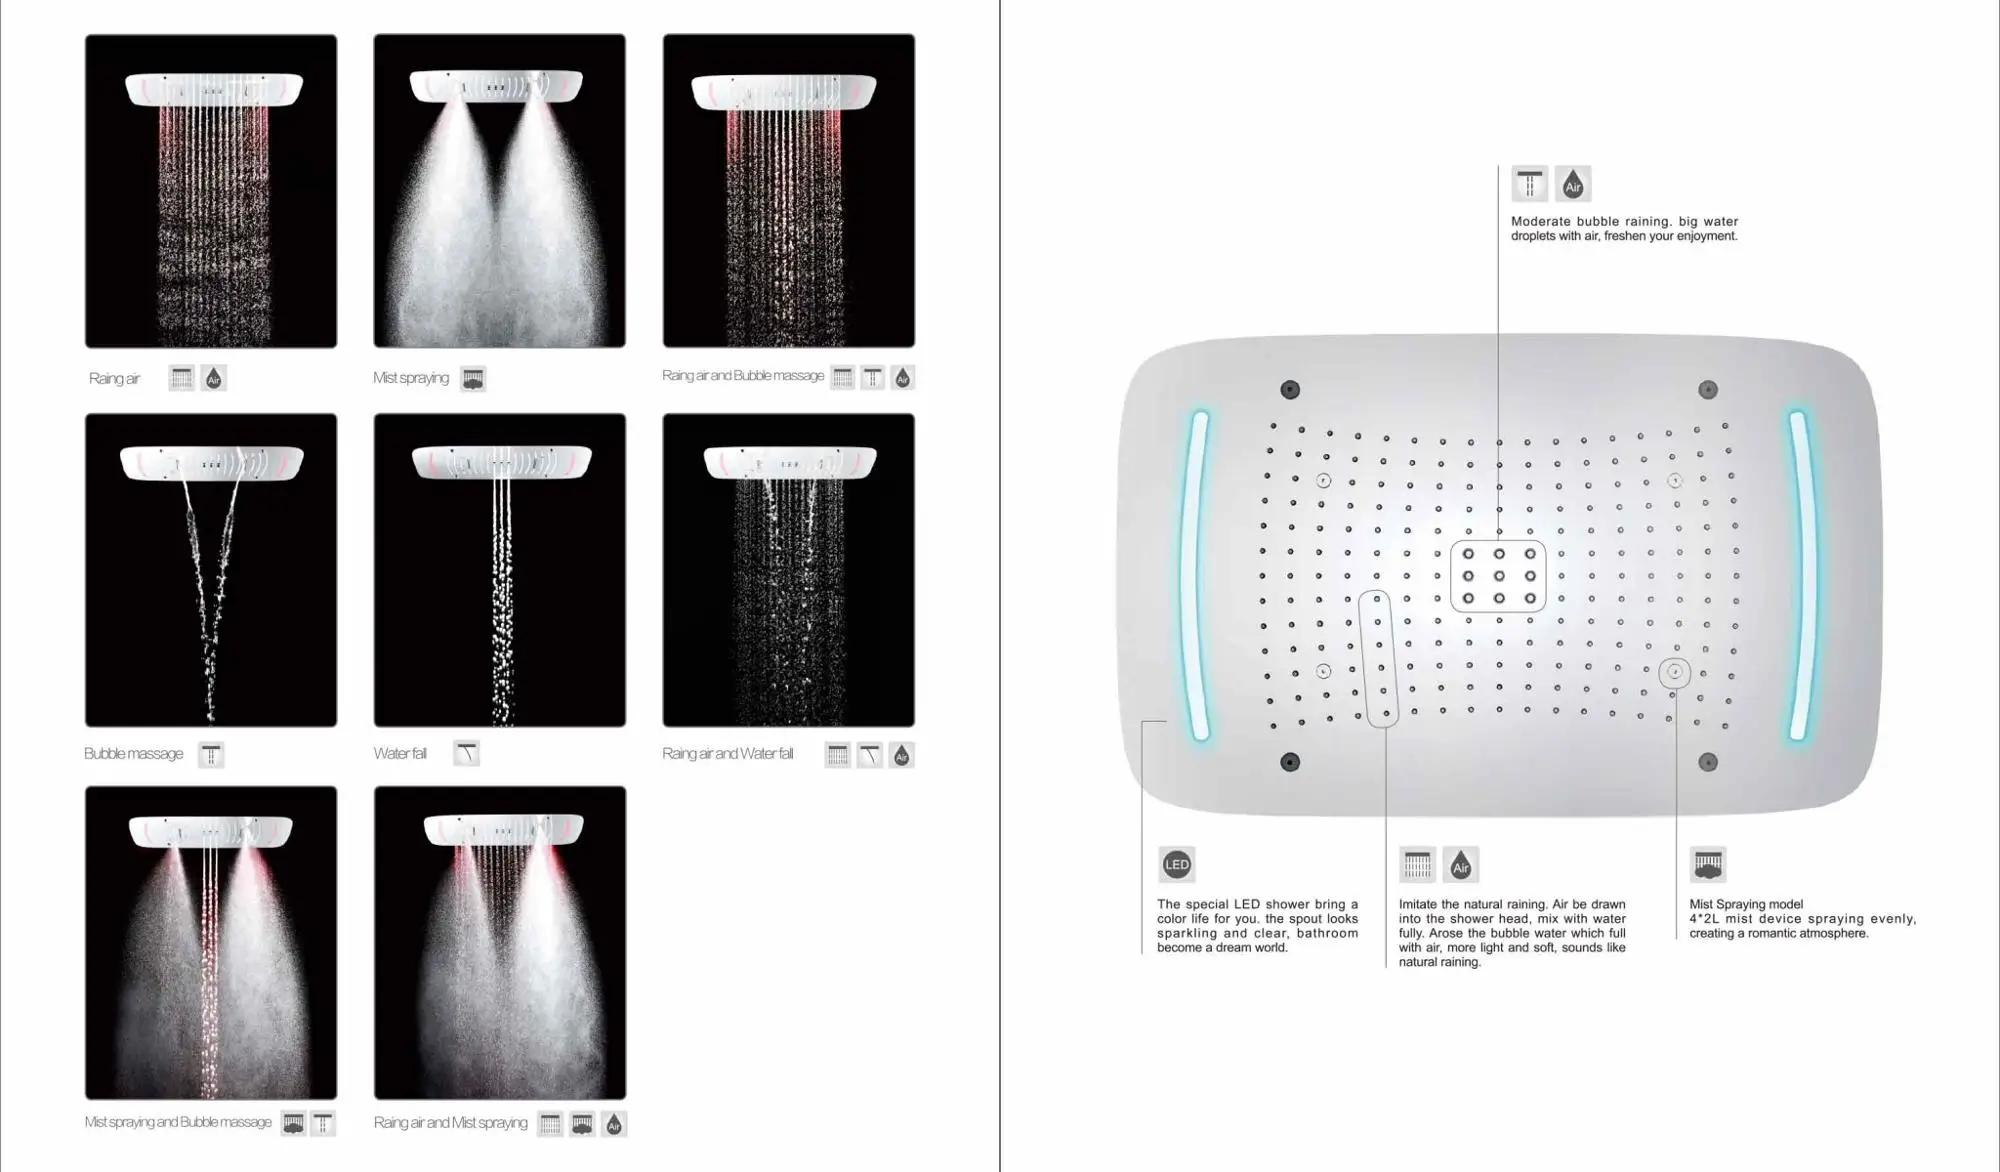 Stainless Steel Bathroom Accessories Smart LED Light Ceiling Shower Head